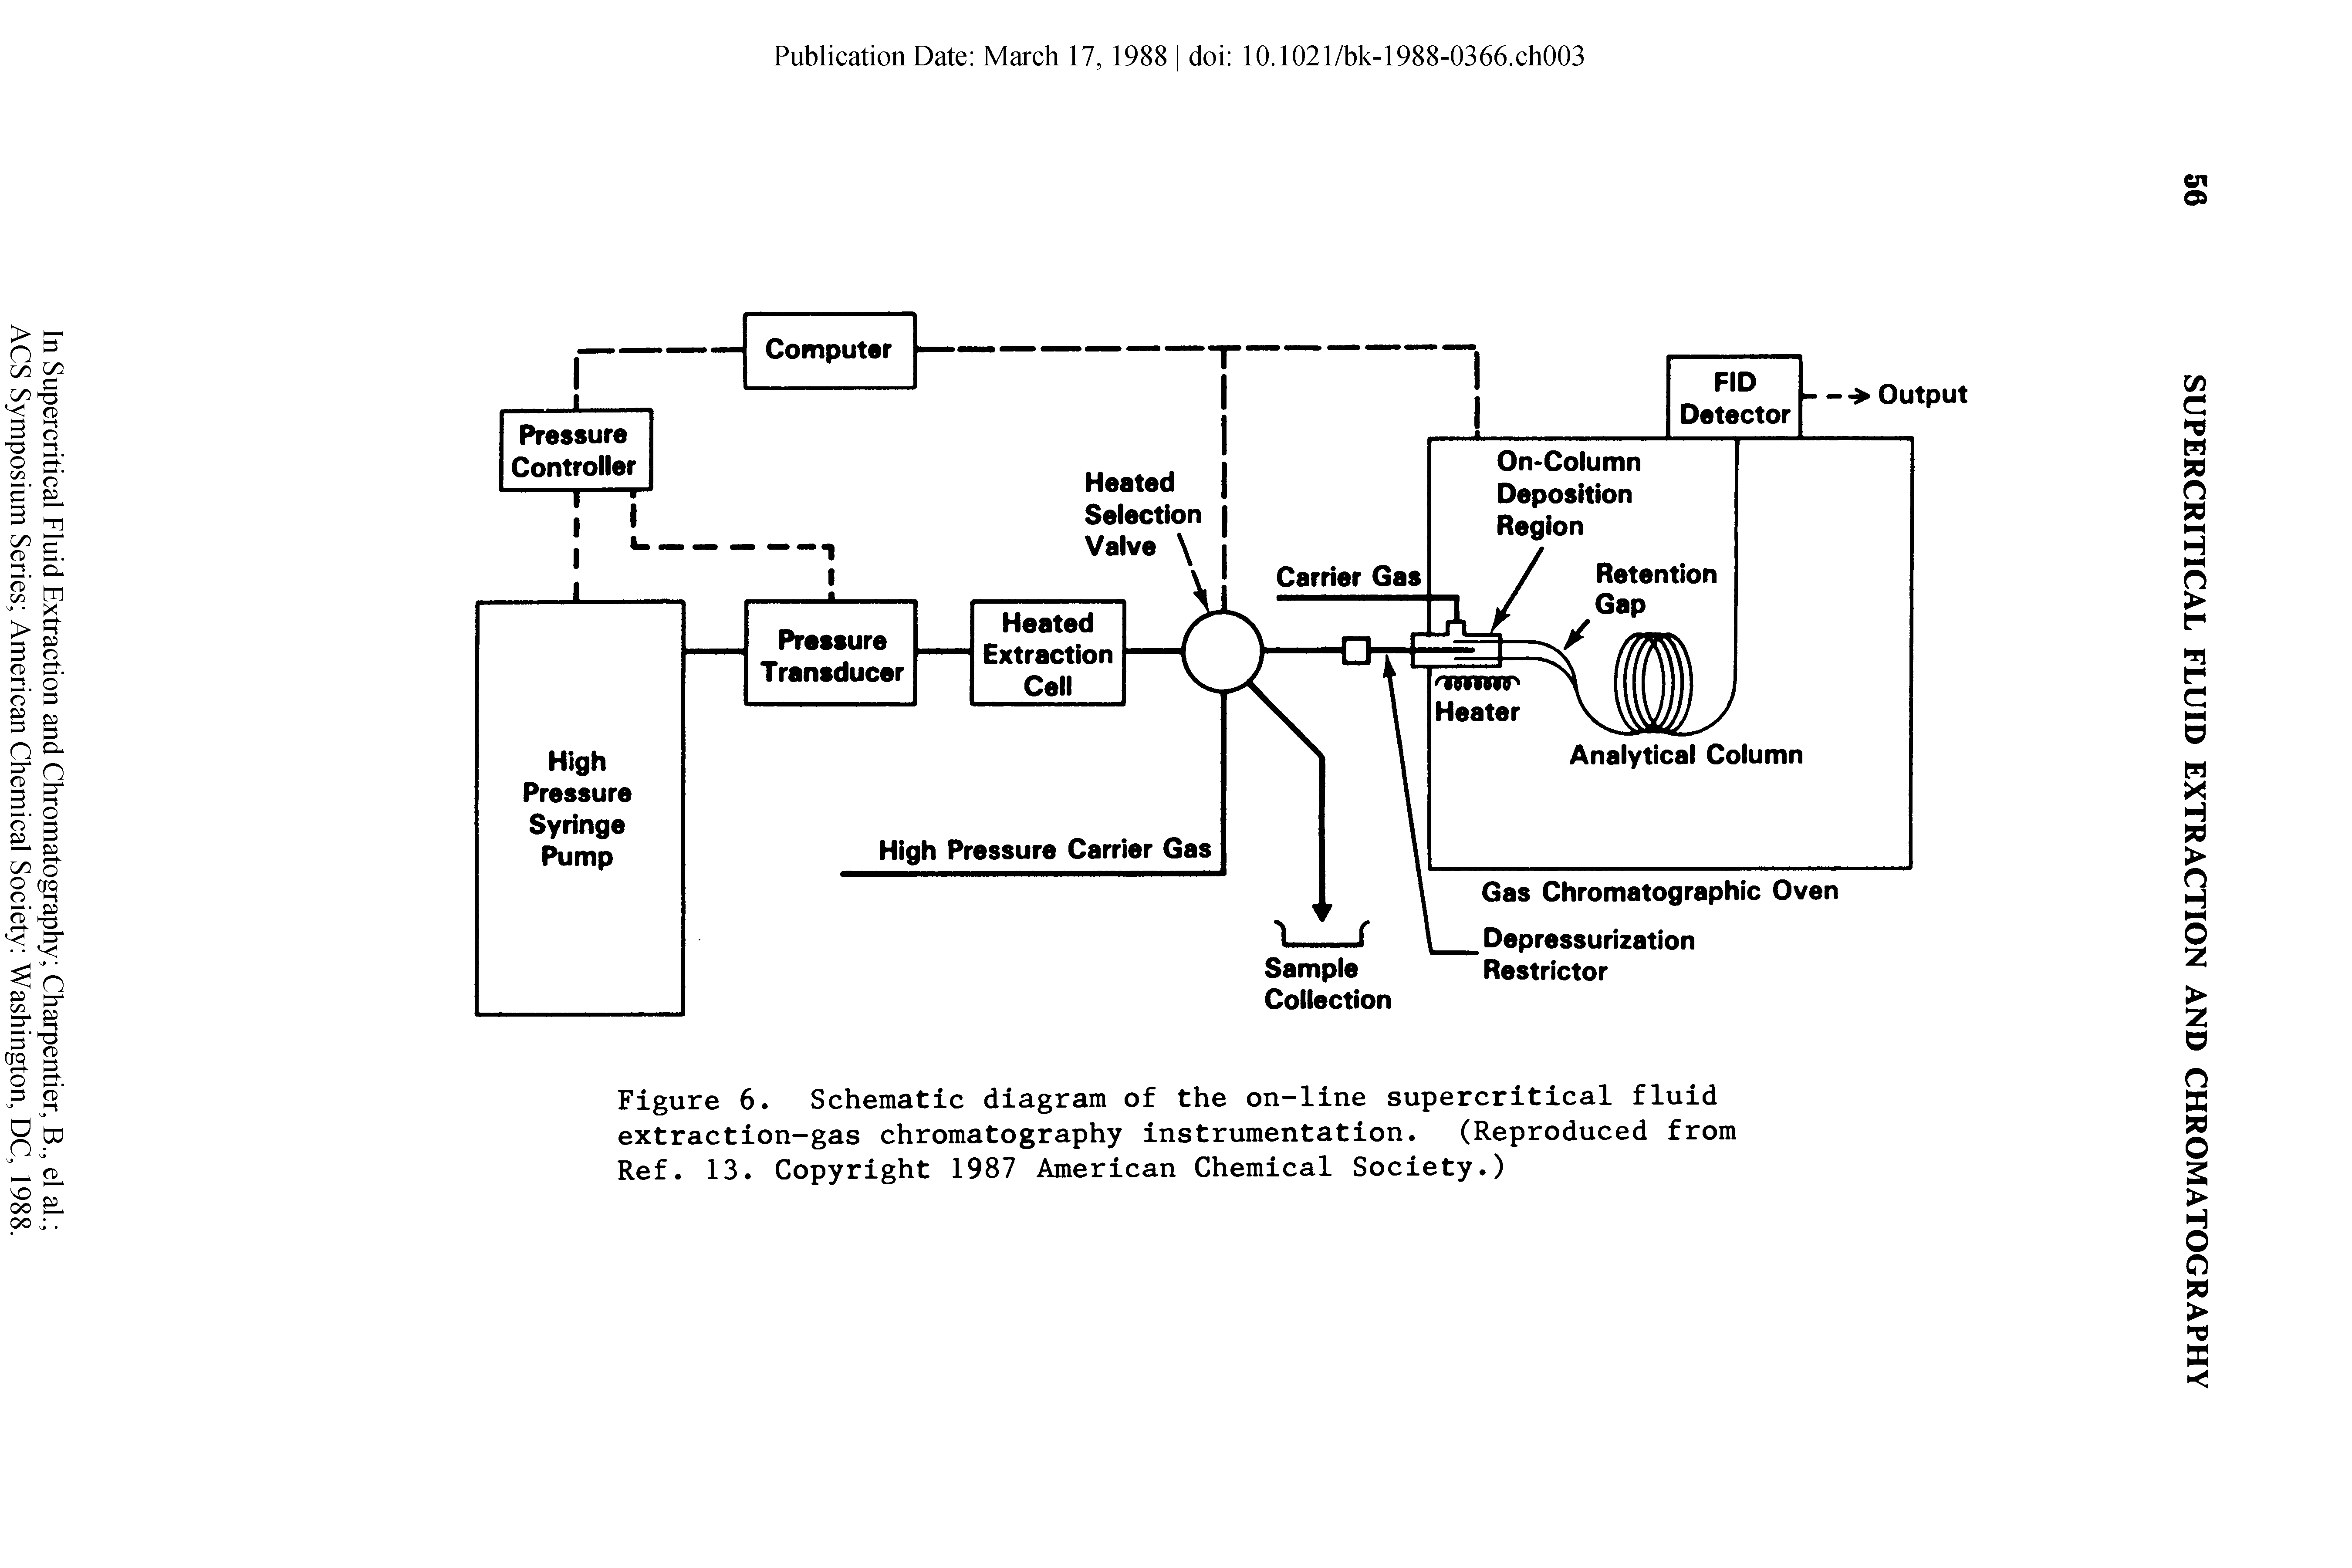 Figure 6. Schematic diagram of the on-line supercritical fluid extraction-gas chromatography instrumentation. (Reproduced from Ref. 13. Copyright 1987 American Chemical Society.)...